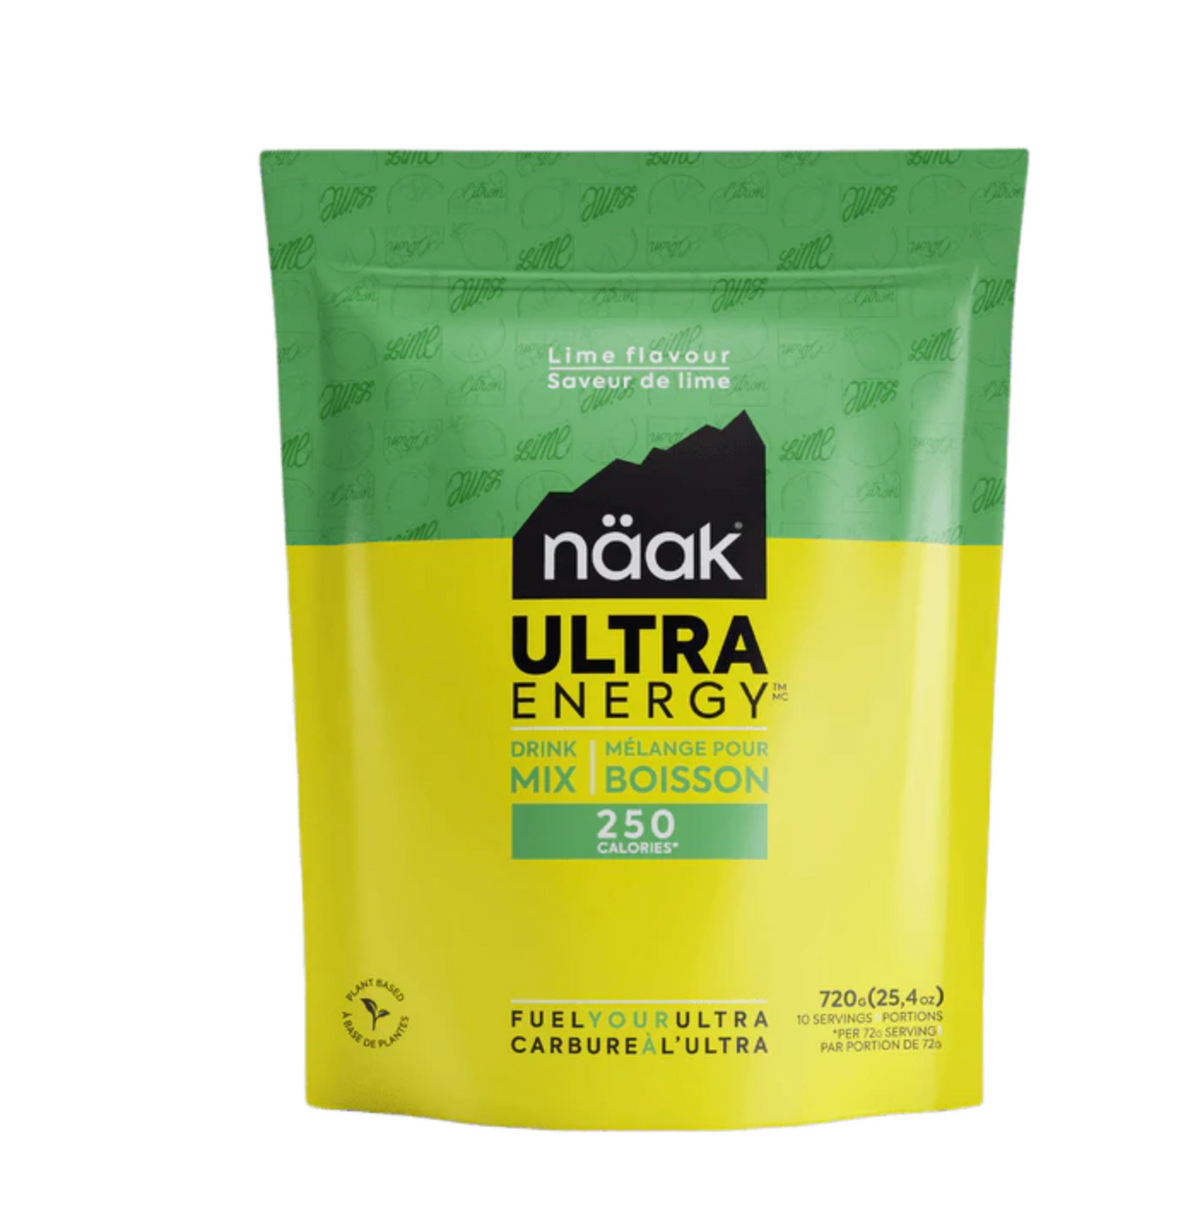 Naak Ultra Energy Drink Mix 10 serving 720g pouch